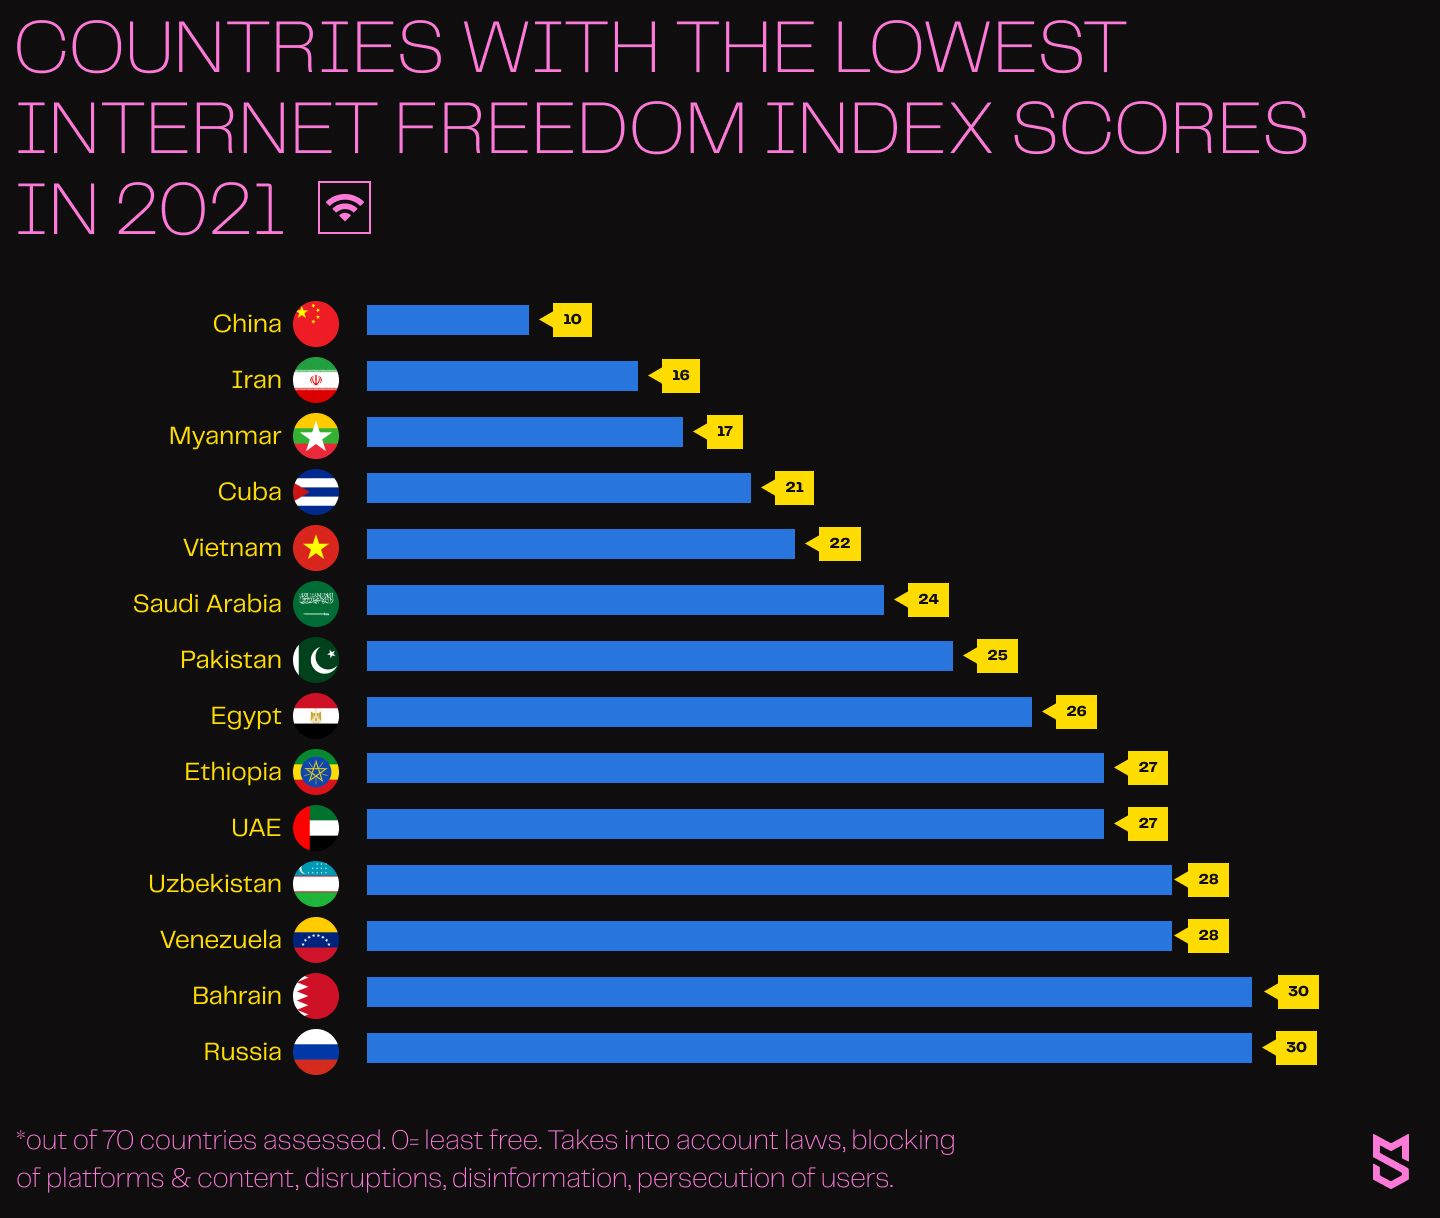 Countries with the lowest internet freedom index scores in 2021